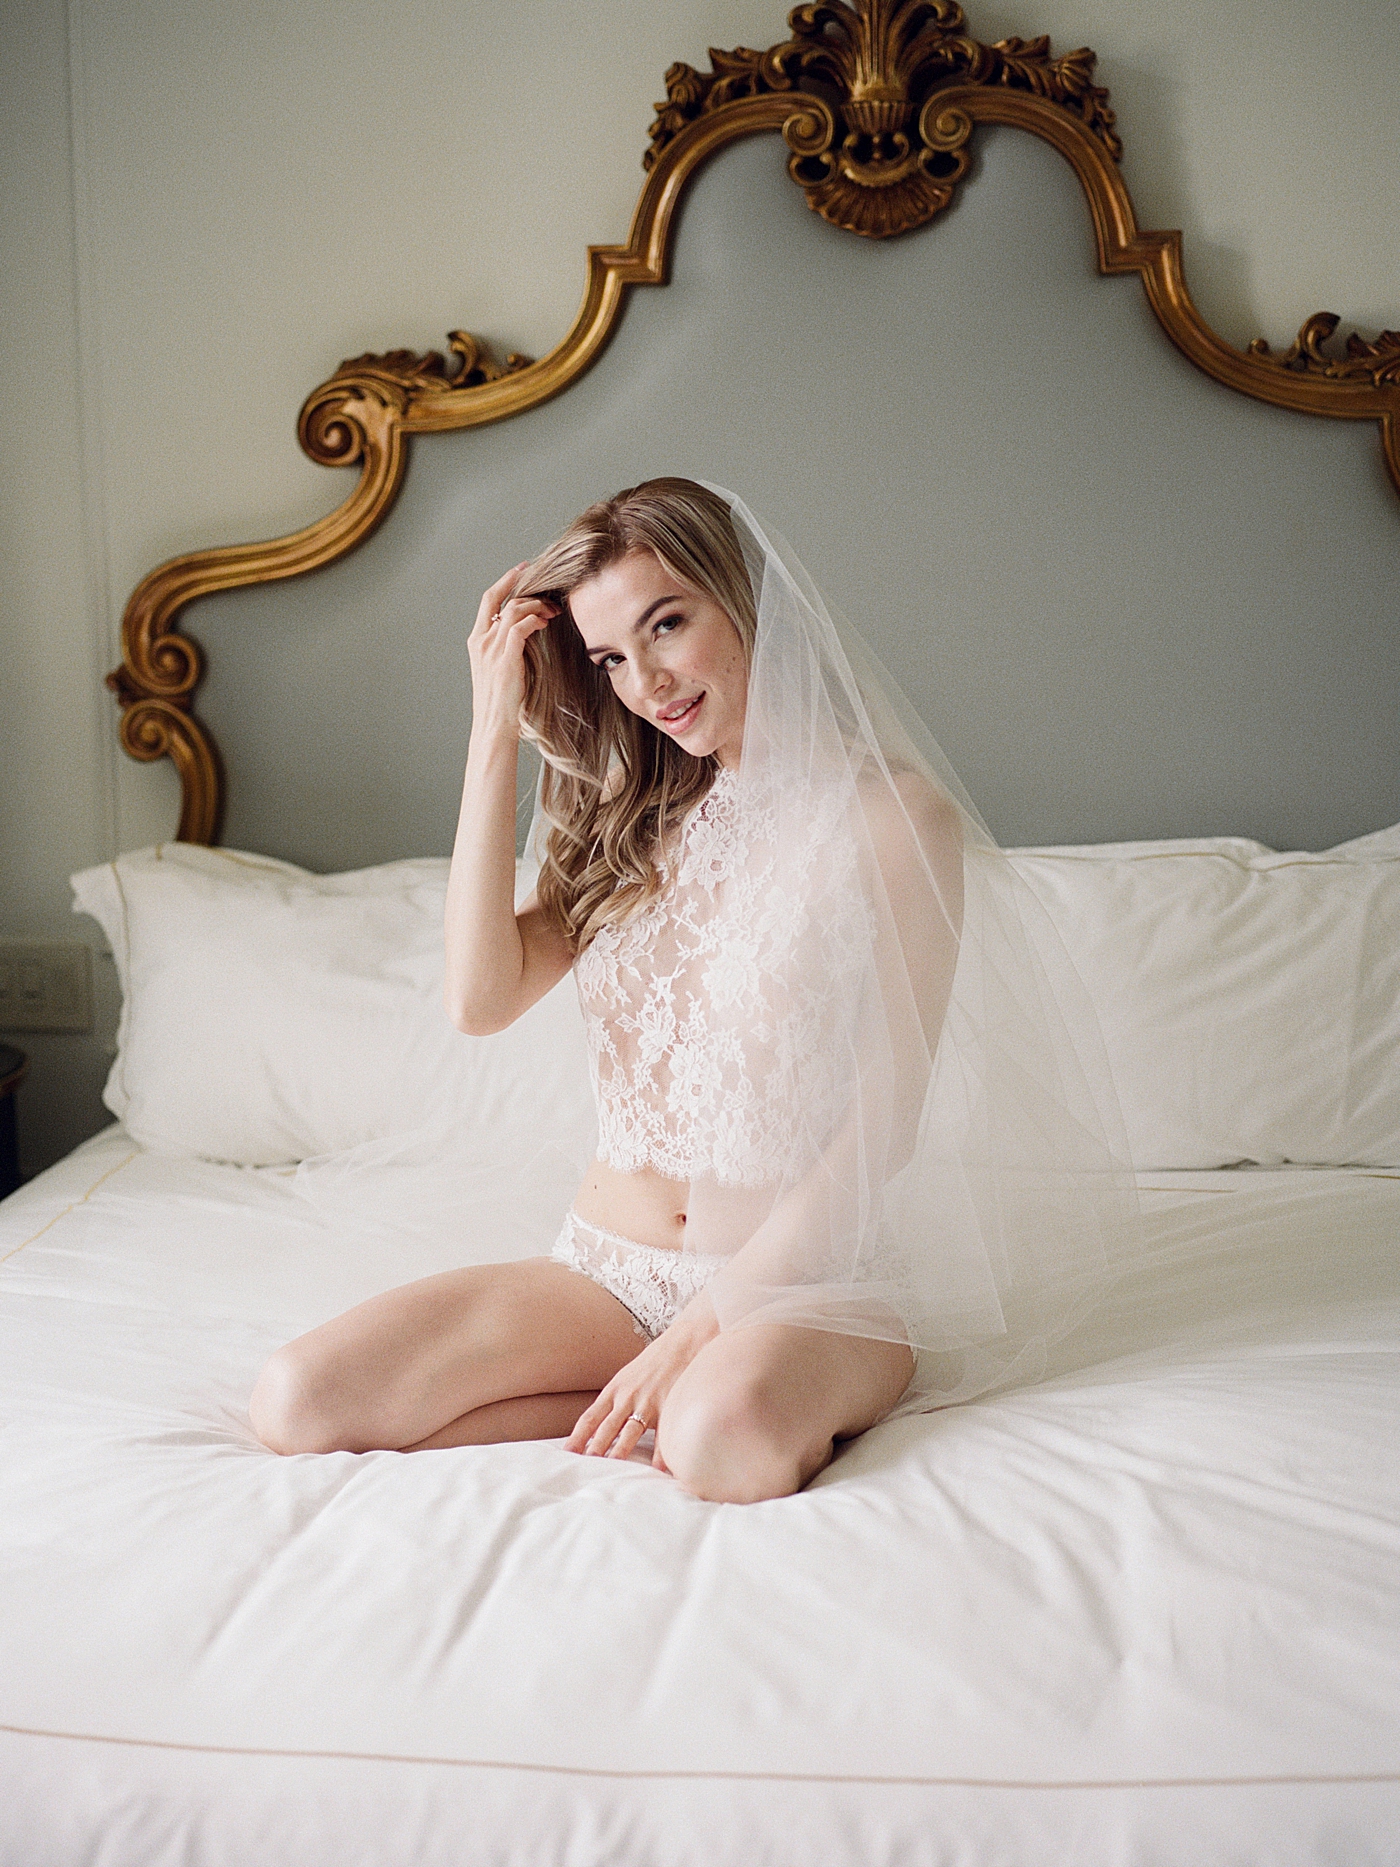 Bride-to-be smiling and posing in white lingerie on a romantic, luxe white bed | Image by Hope Helmuth Photography